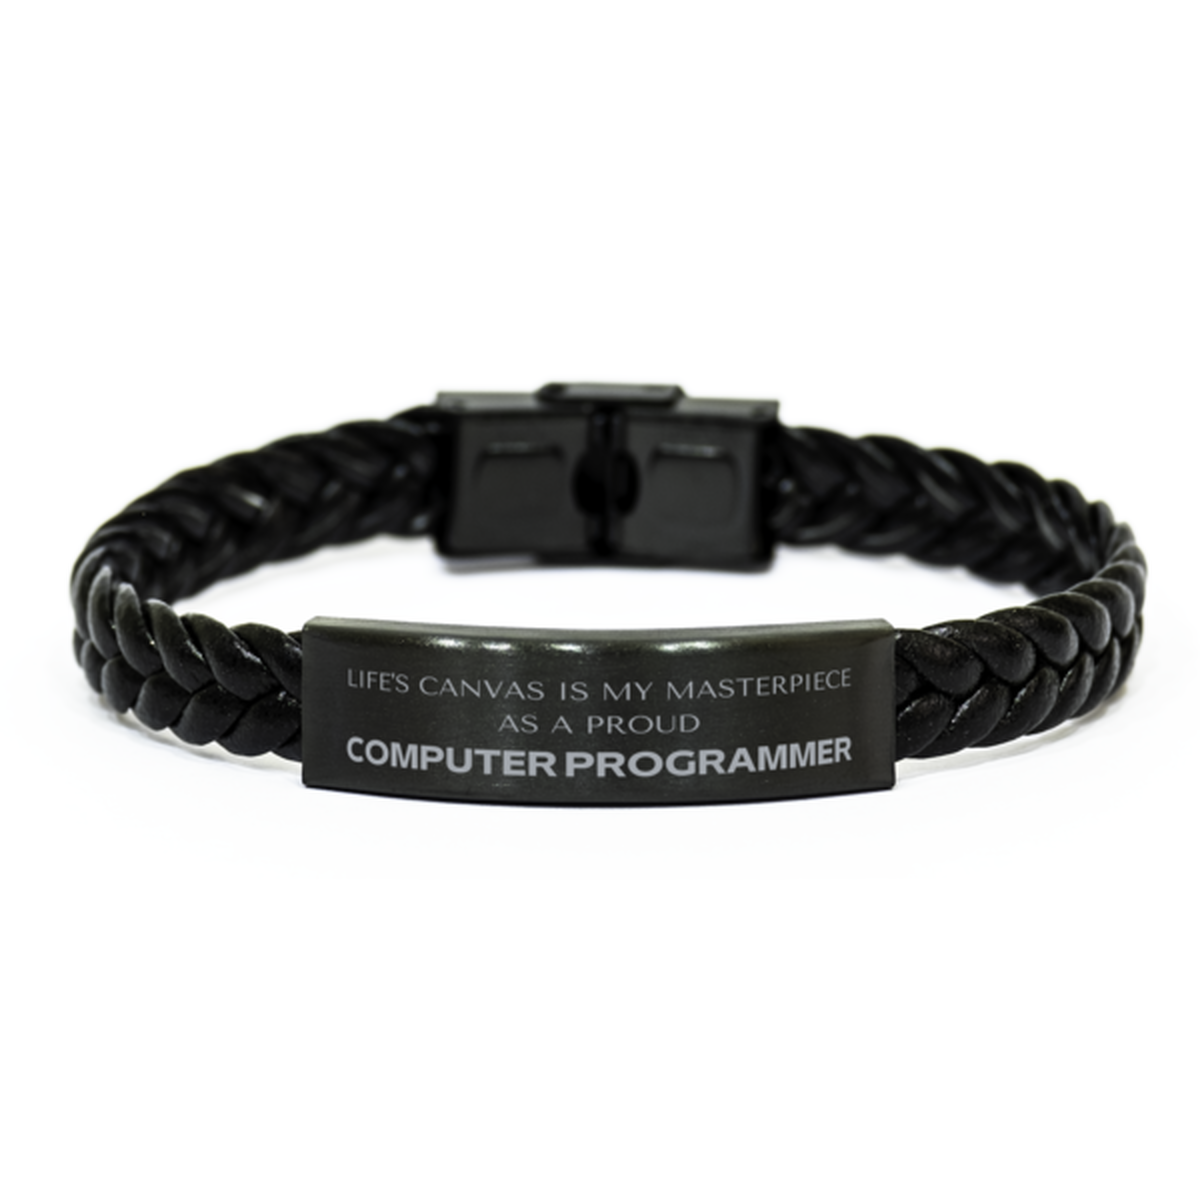 Proud Computer Programmer Gifts, Life's canvas is my masterpiece, Epic Birthday Christmas Unique Braided Leather Bracelet For Computer Programmer, Coworkers, Men, Women, Friends